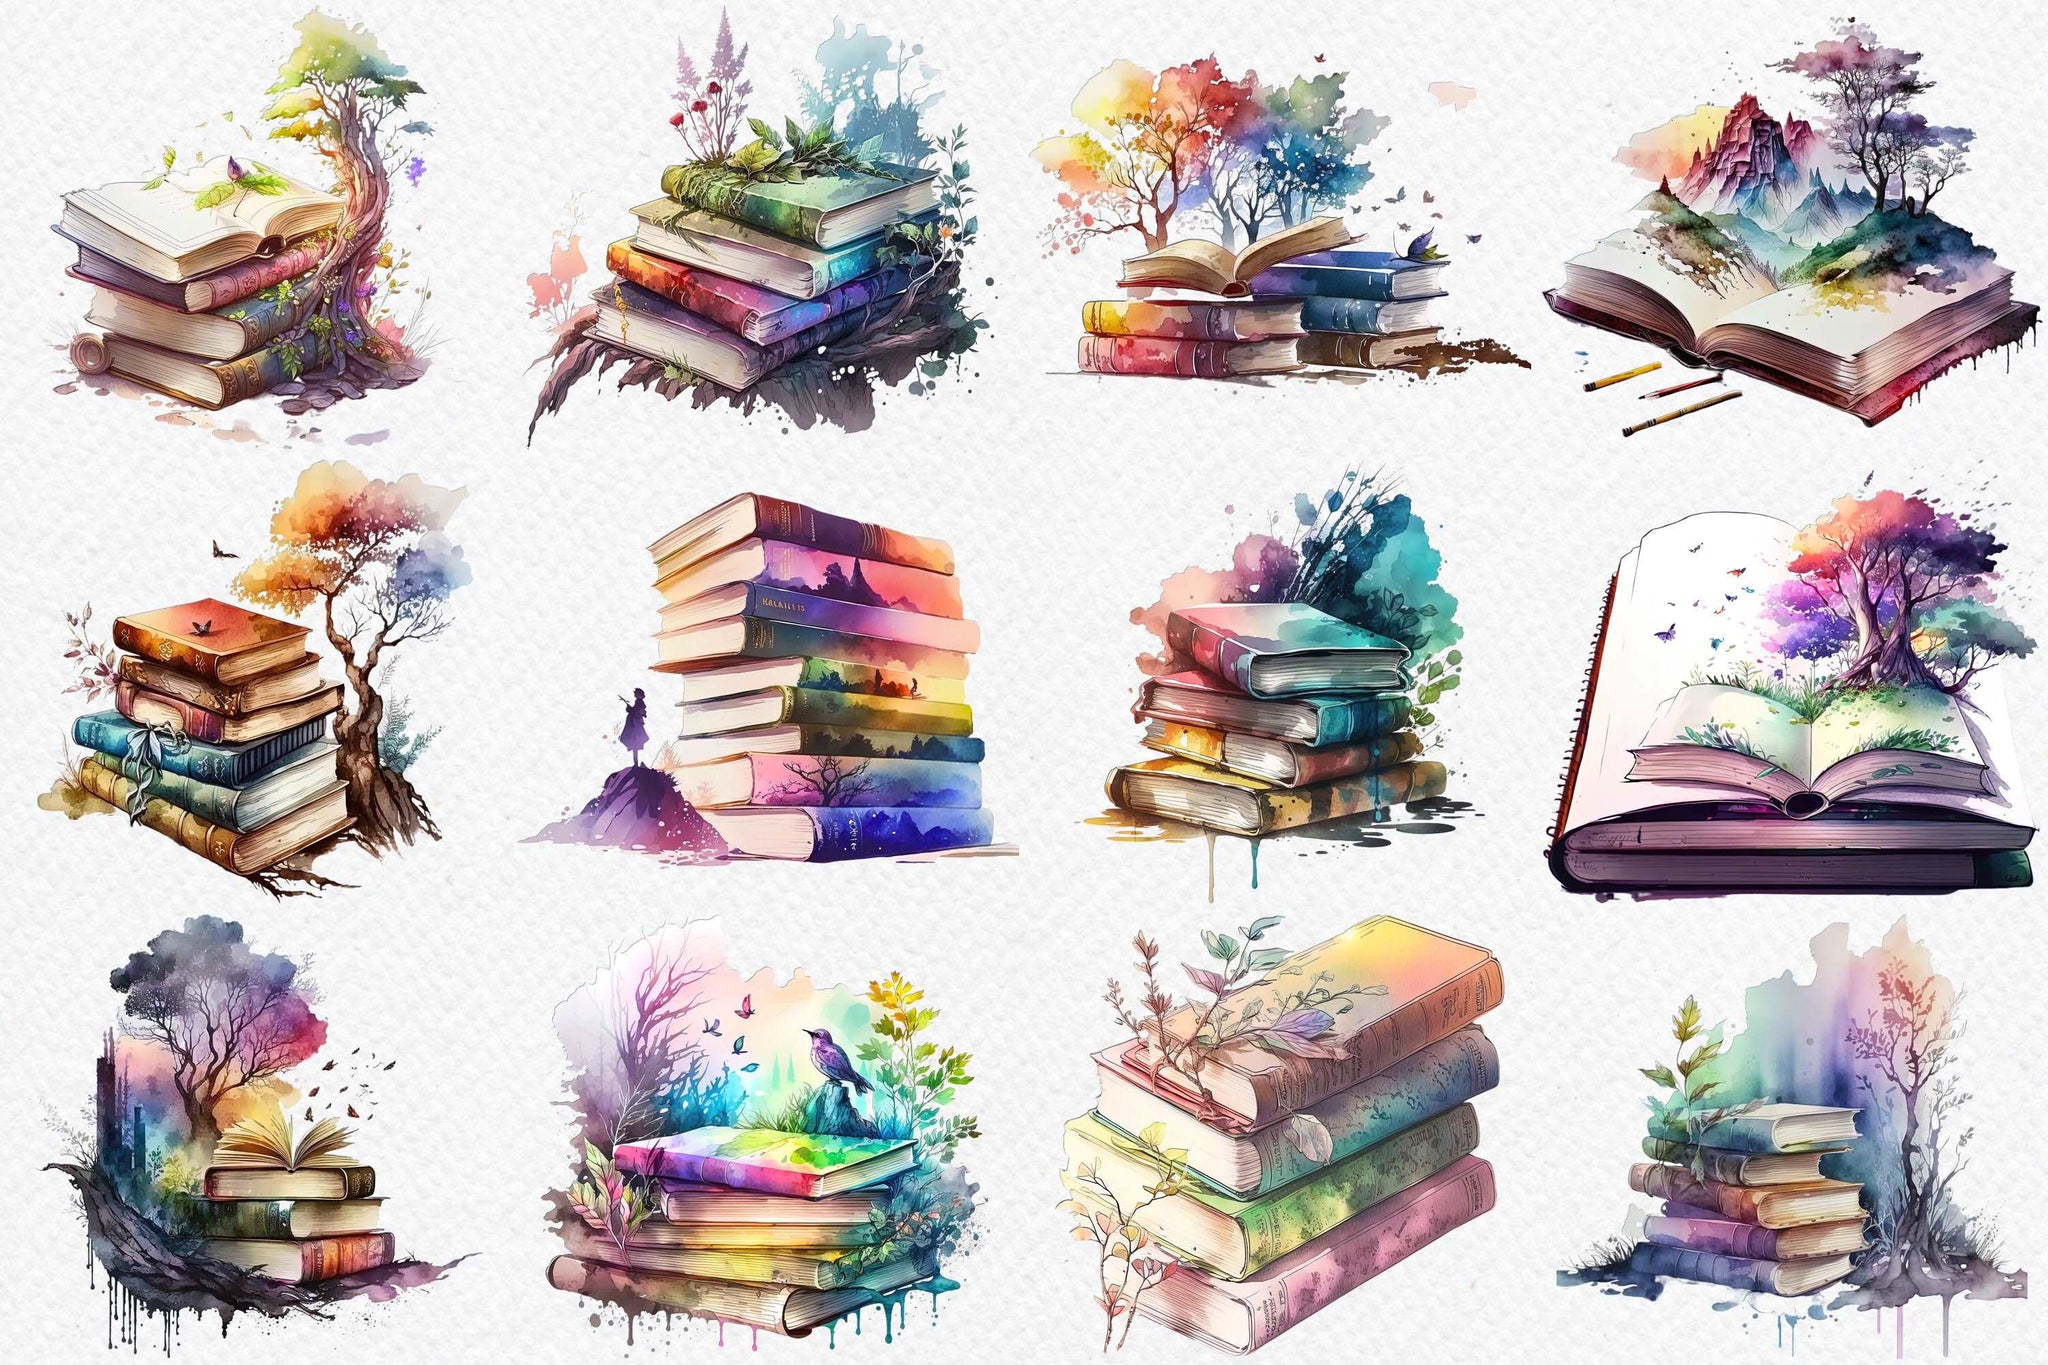 Book clipart, books bundle, reading clipart, library clipart, old books. Retro scrapbooking. Digital watercolor. png. Free commercial use.